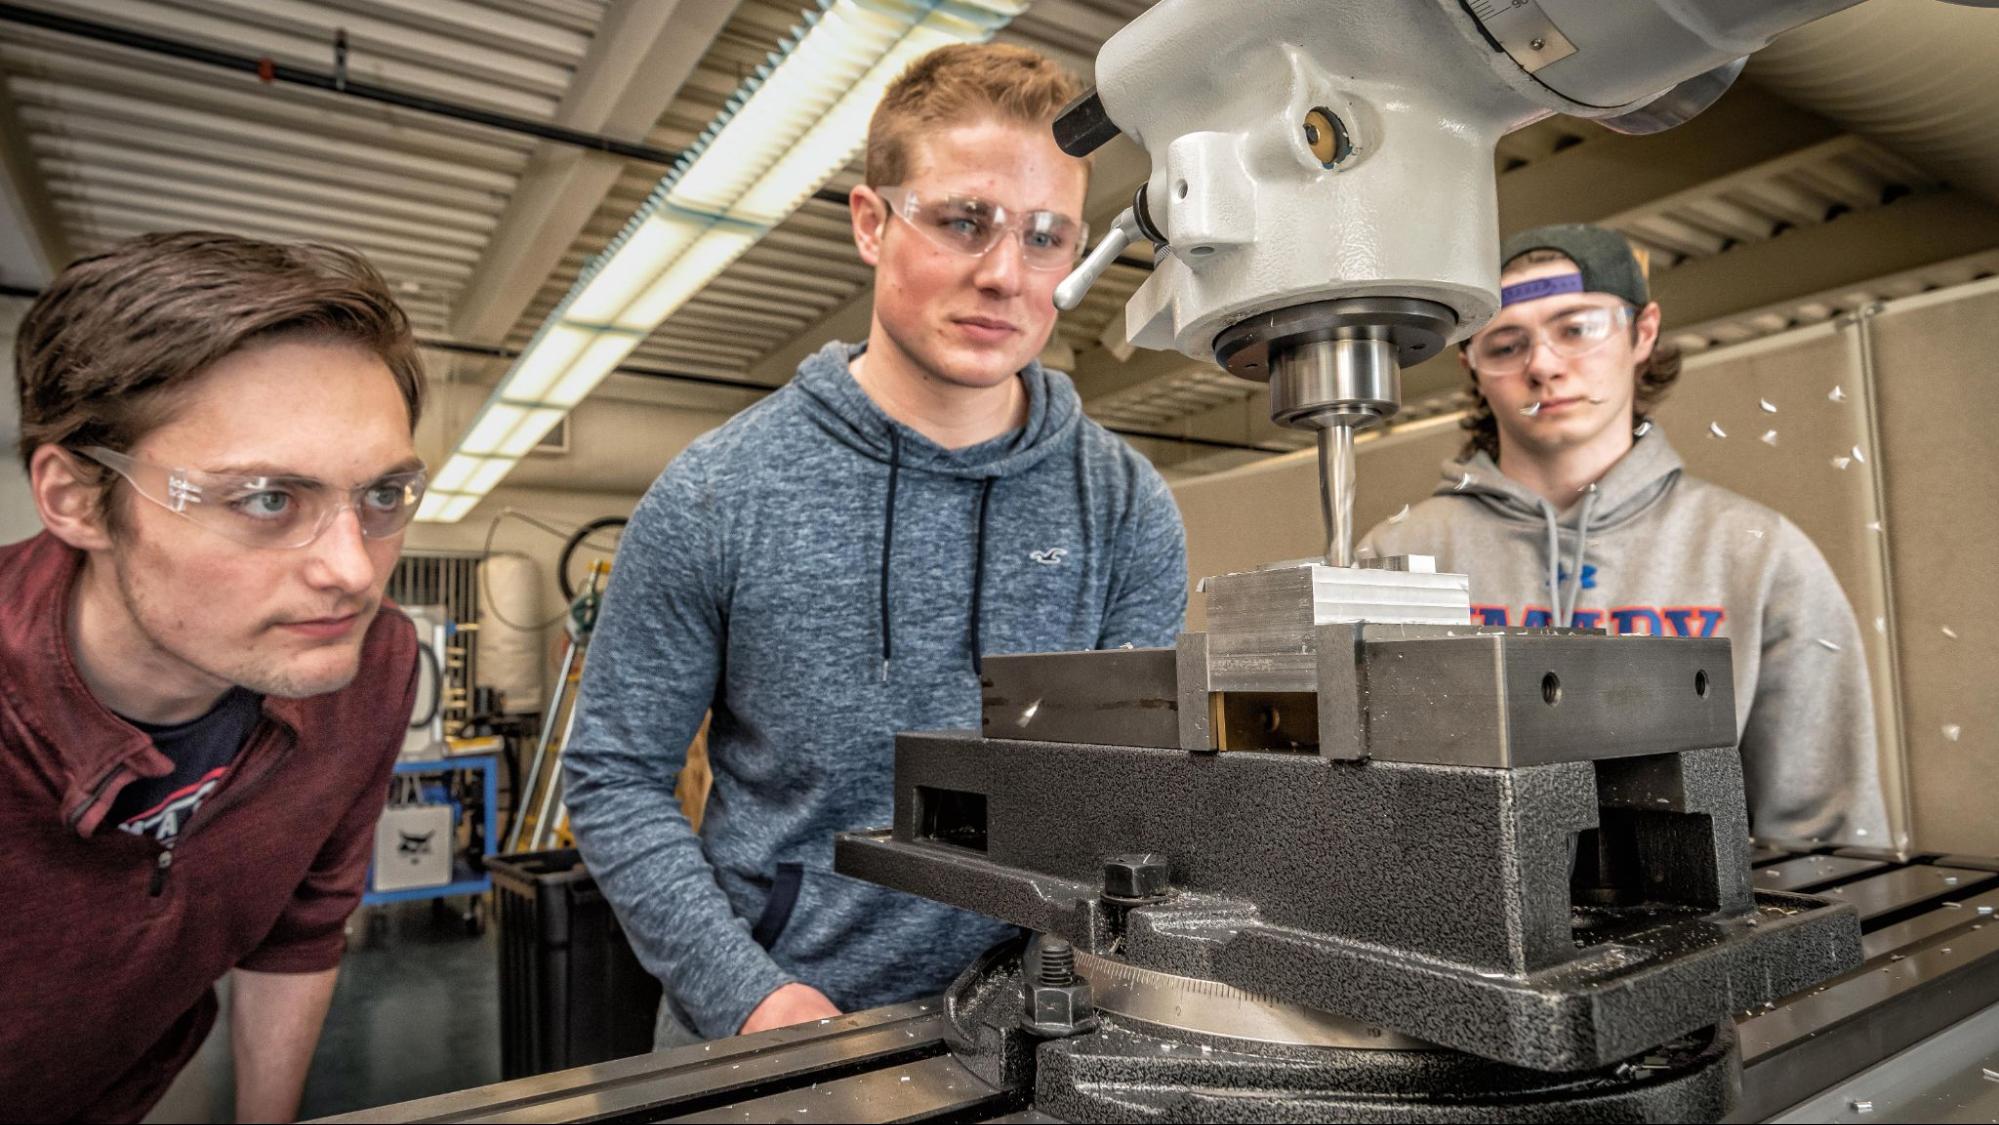 Three engineering students work together to operate a drill saw